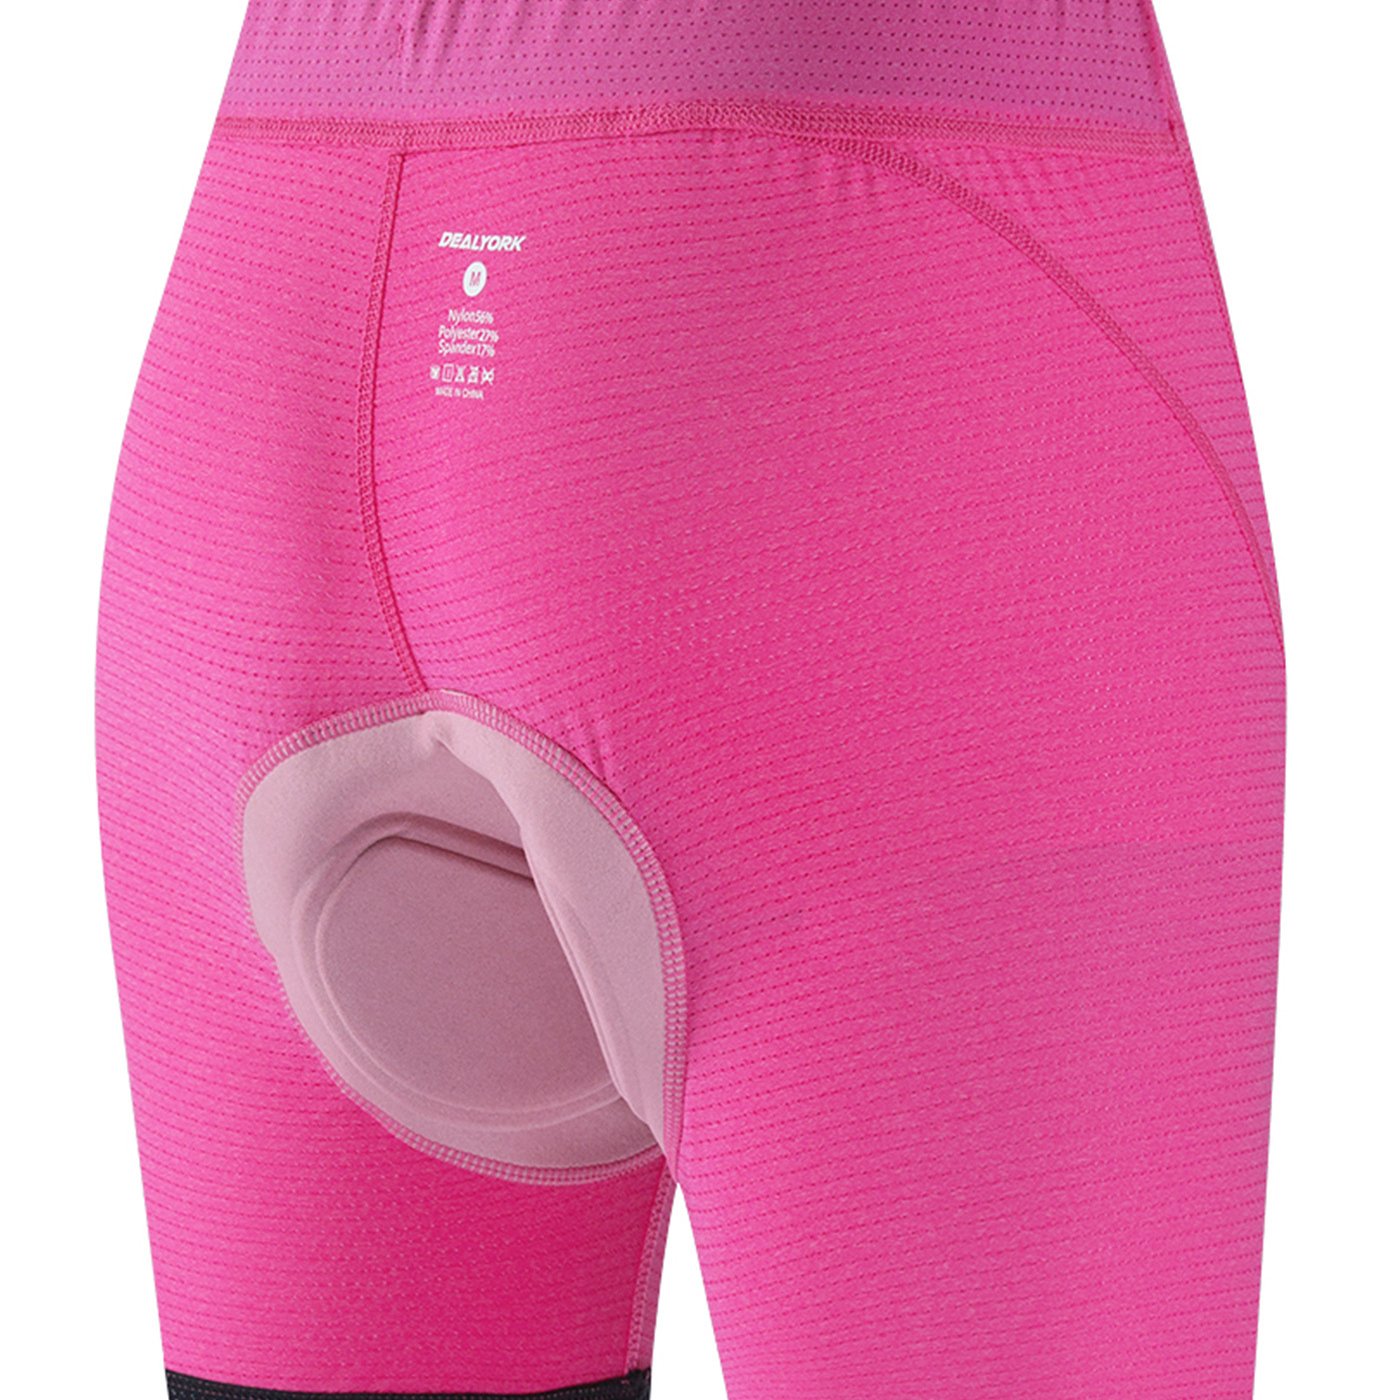 DEALYORK Women's Padded Cycling Bike Underwear Shorts with 3D Padding